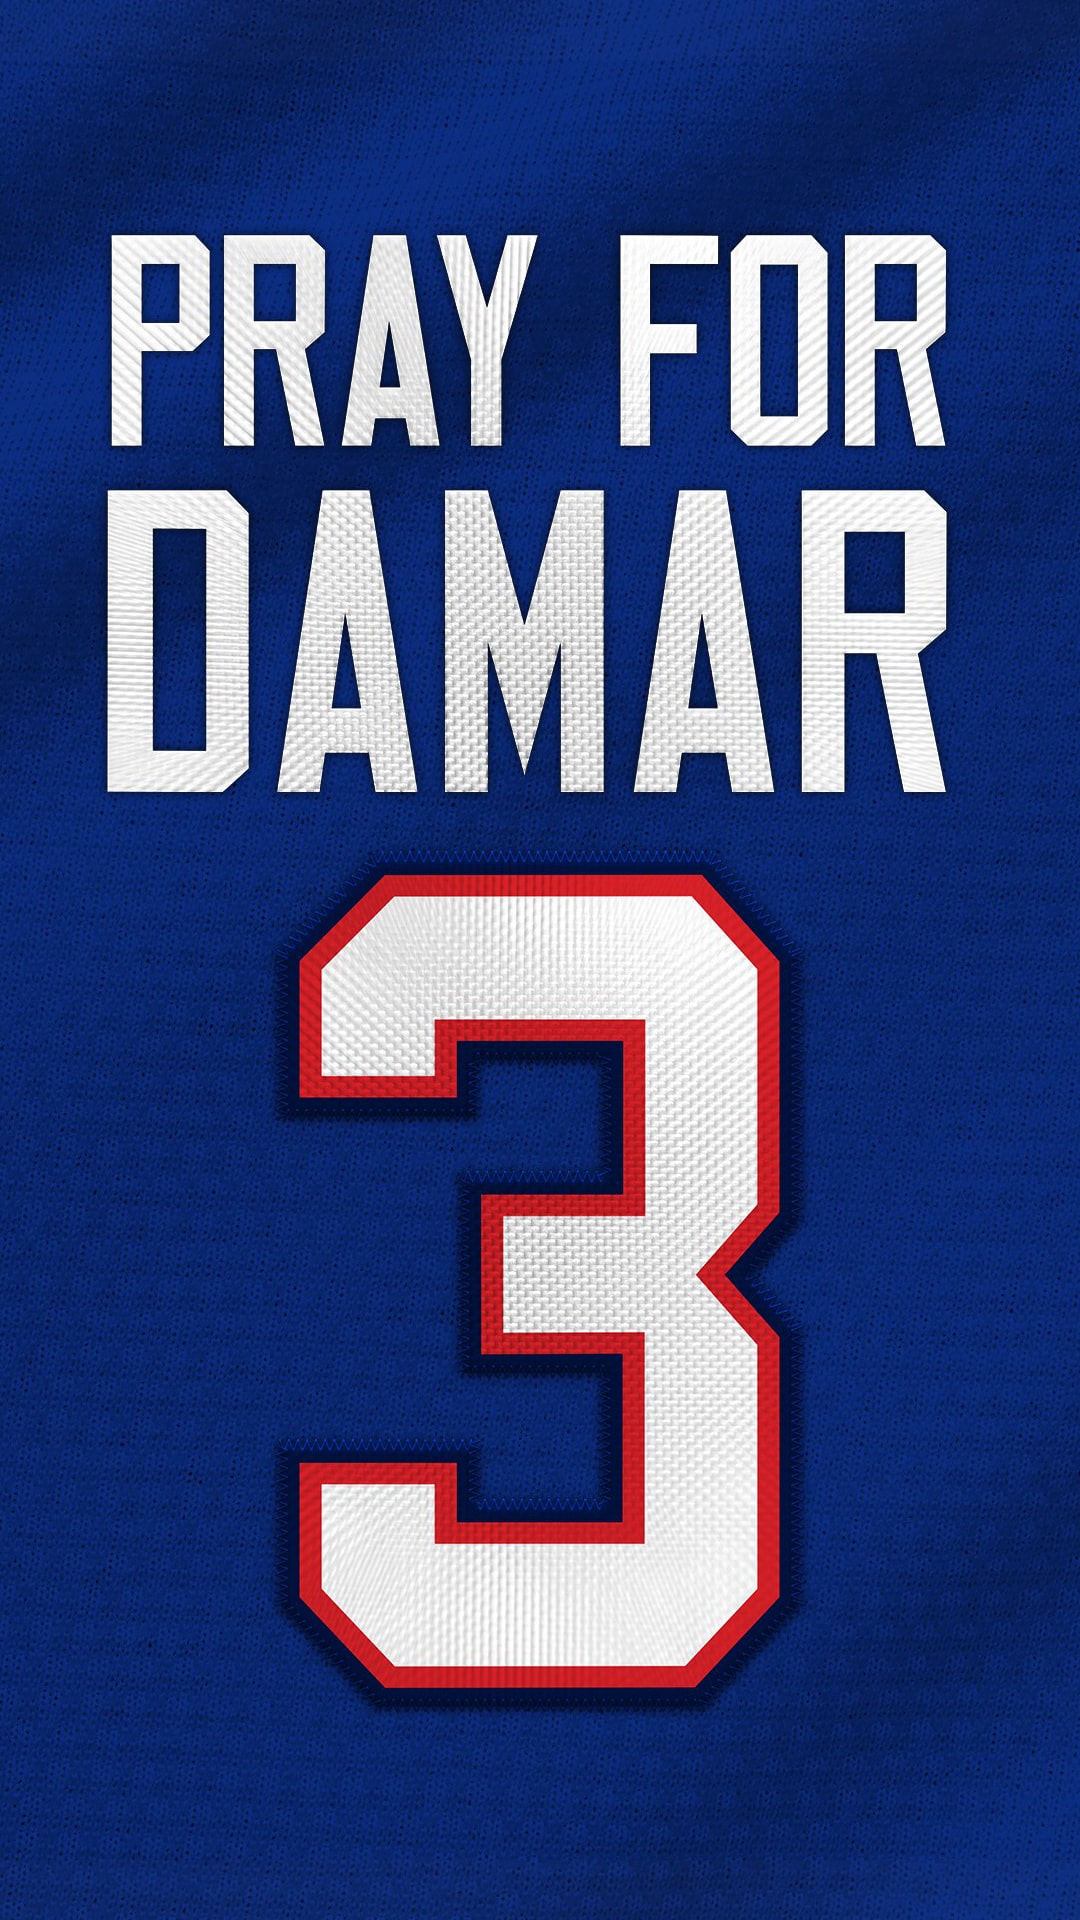 All NFL teams changed Twitter profile pictures to Pray for Damar  KHQA